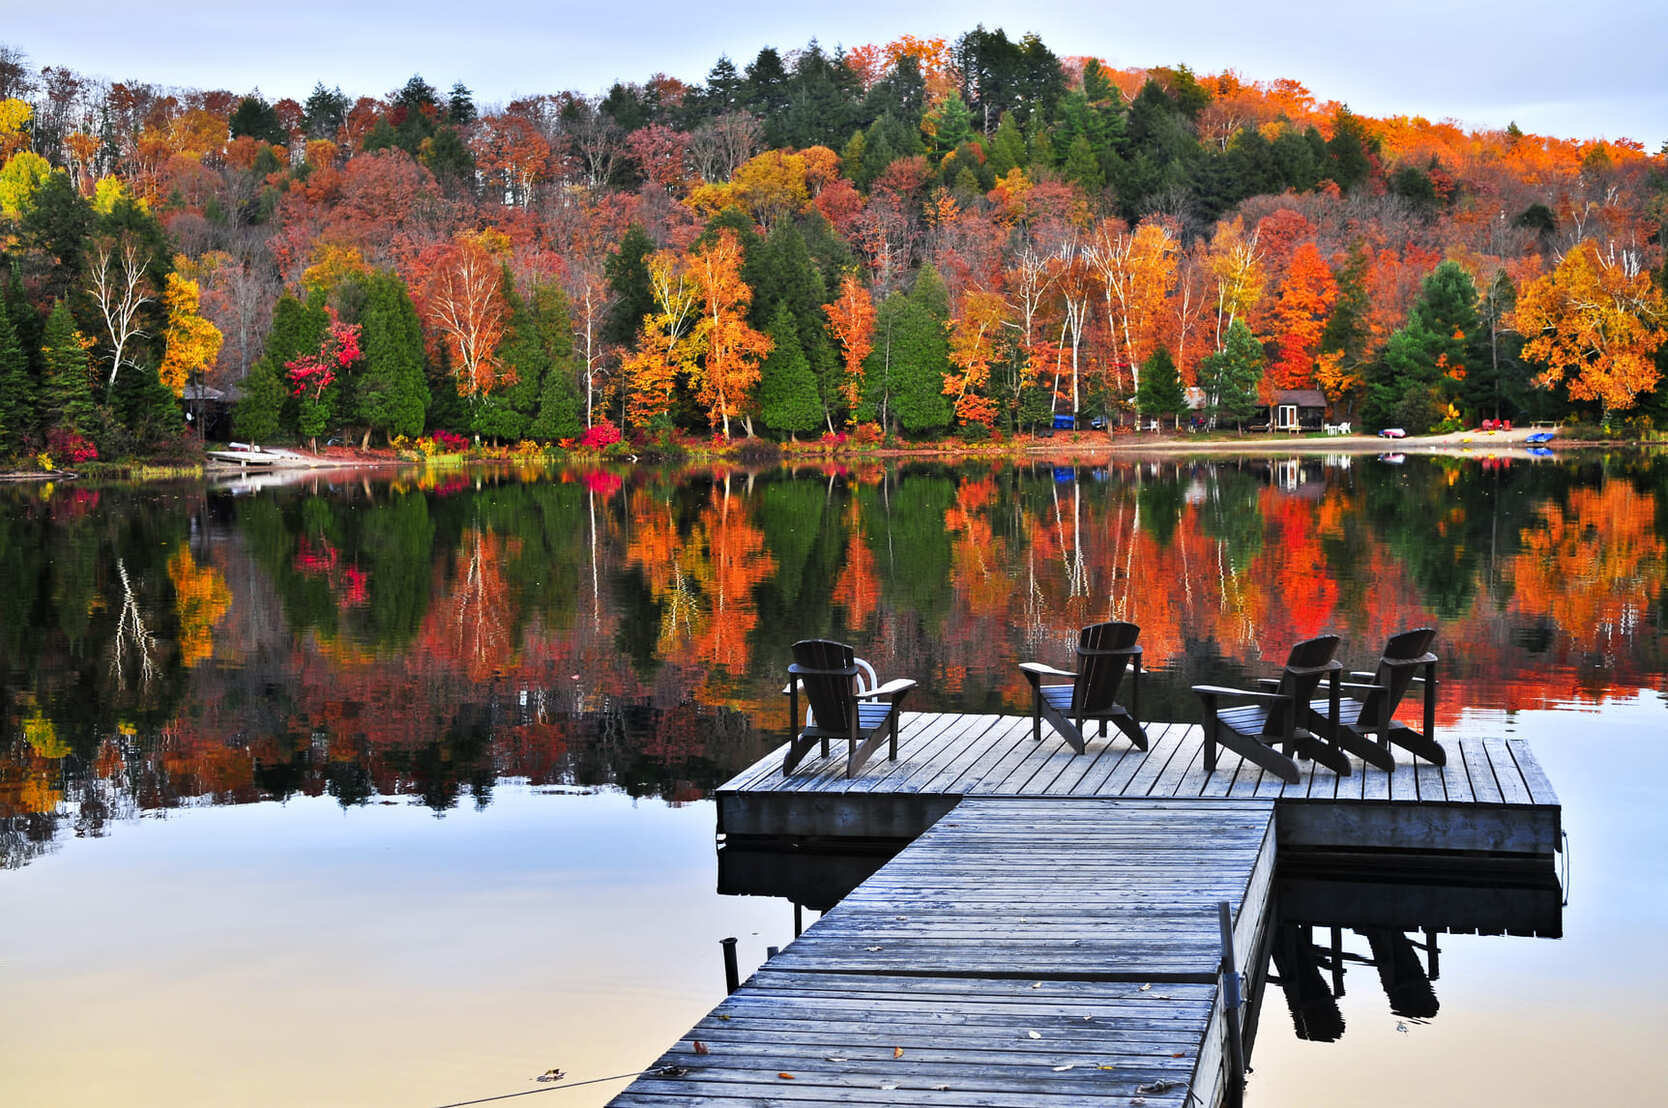 A dock with chairs sitting on a Central Ontario lake in the fall.